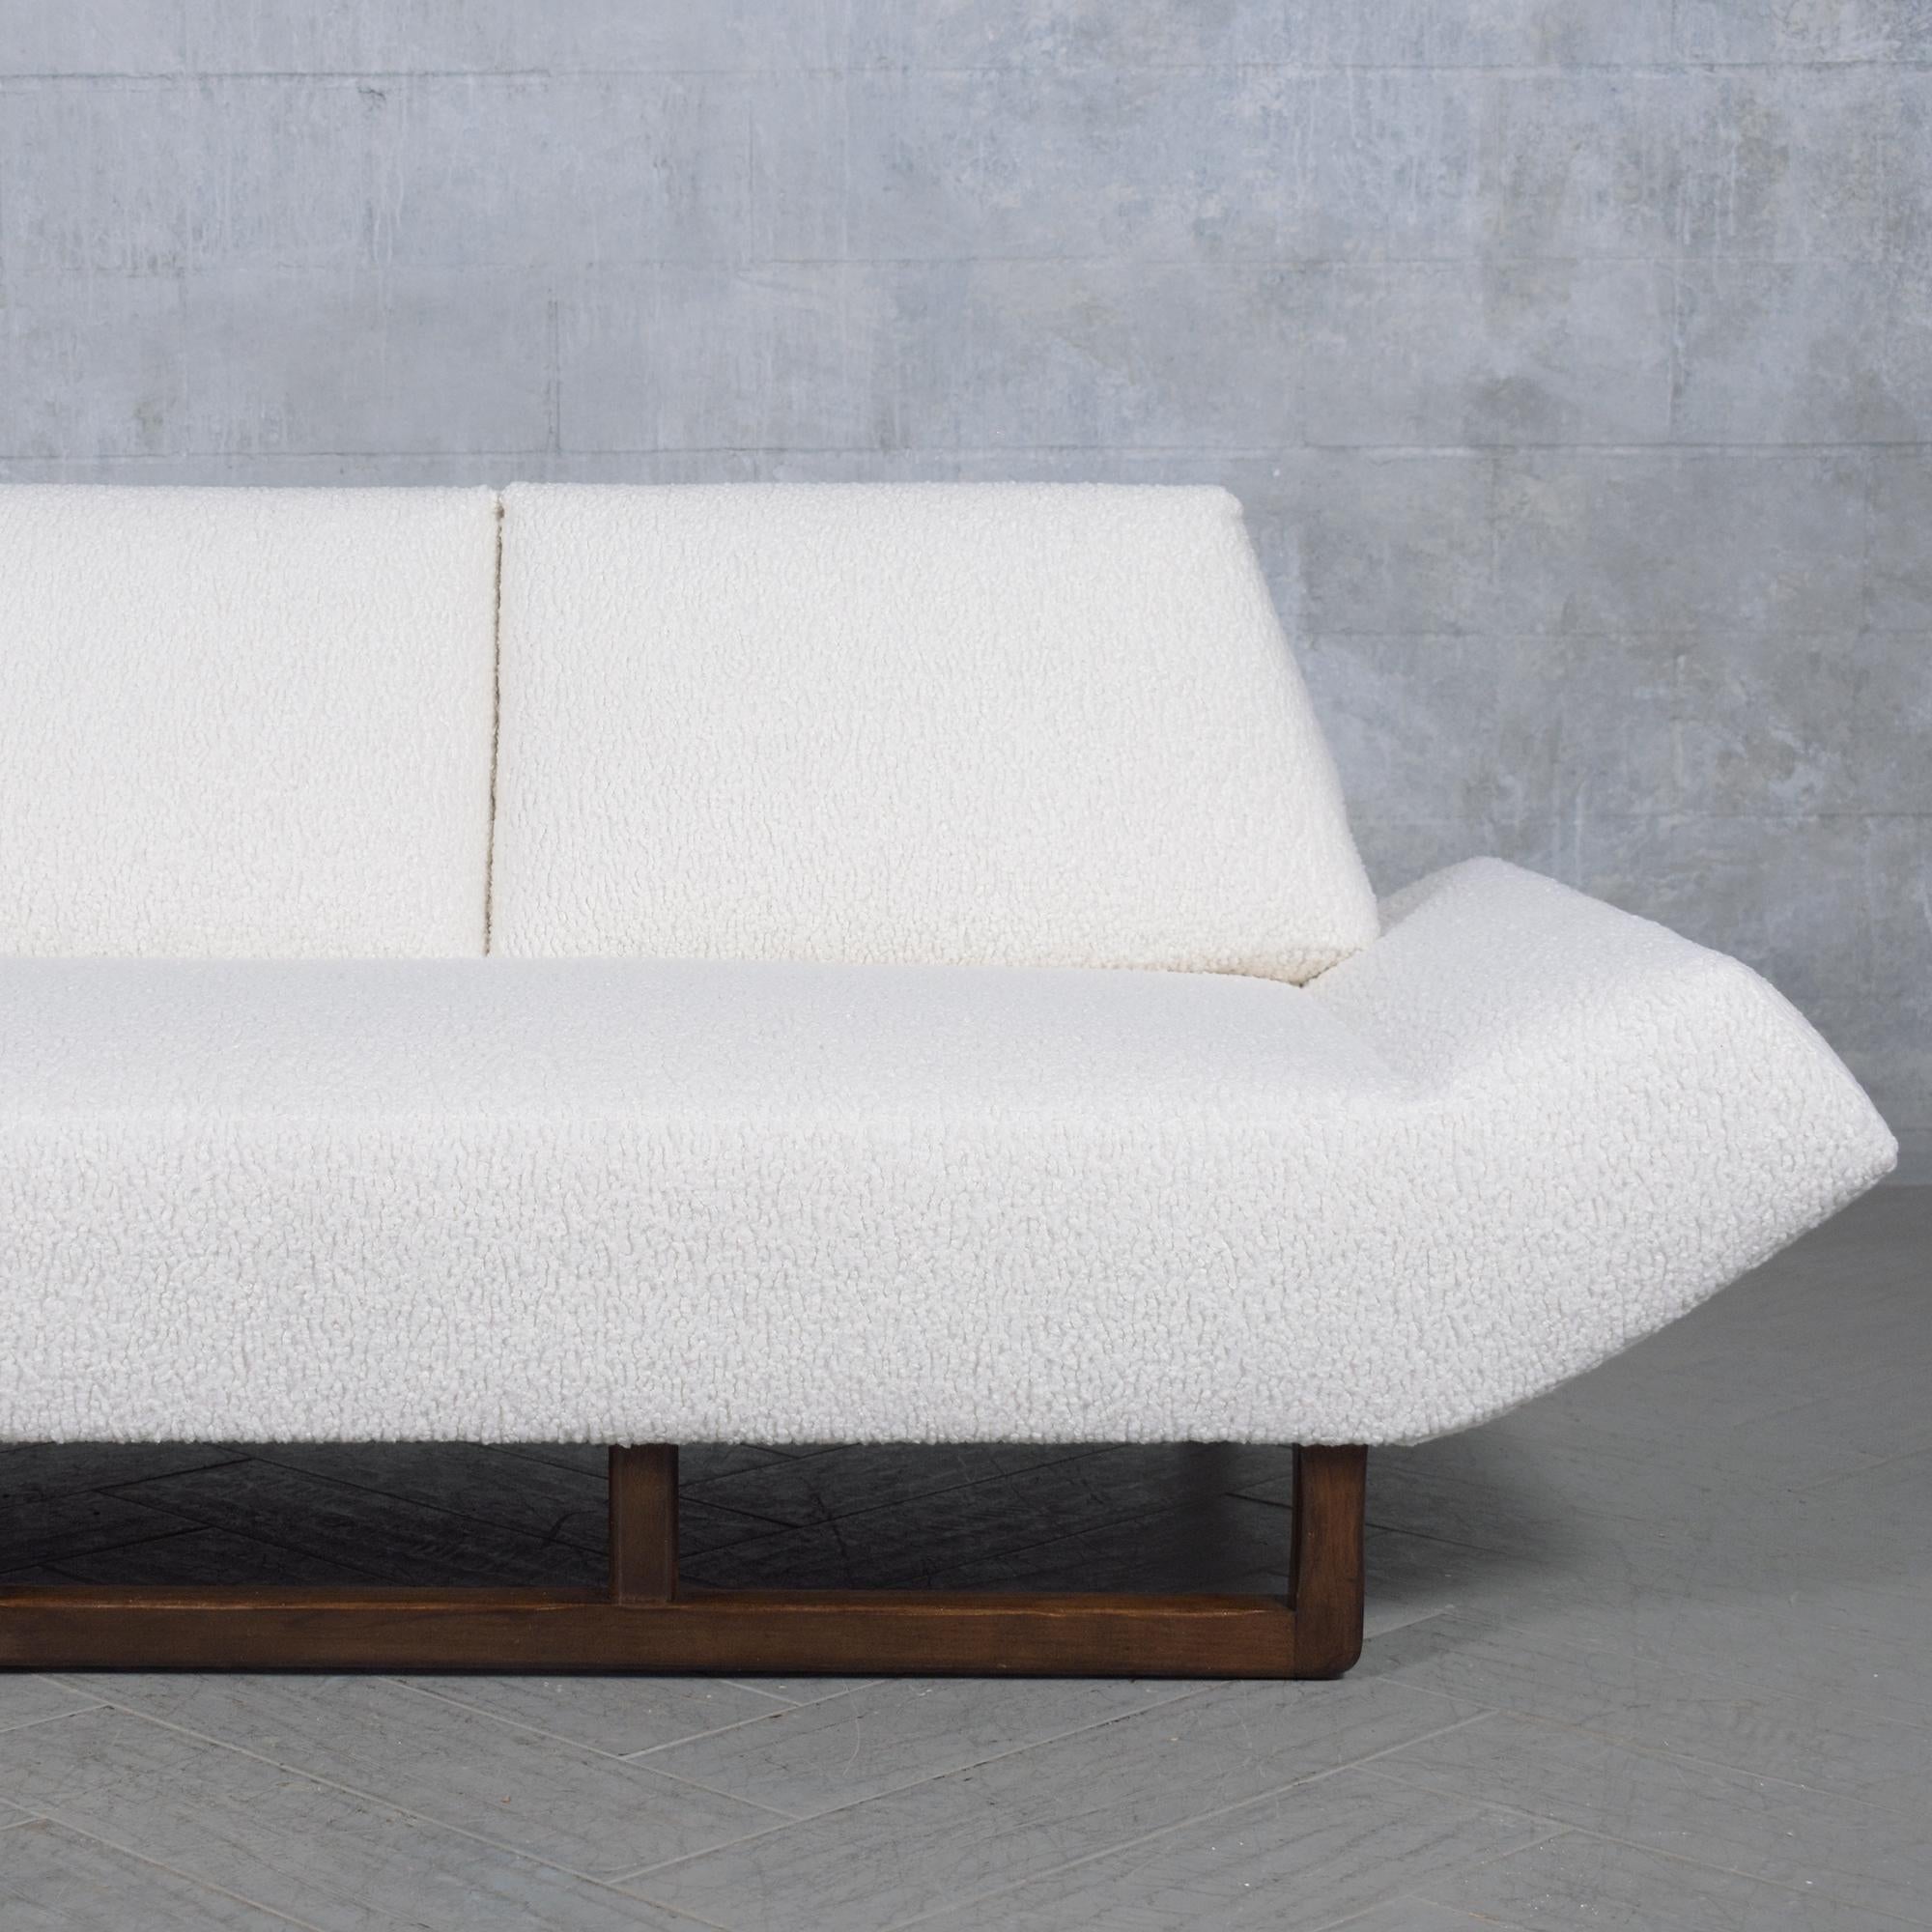 Hand-Crafted Vintage Mid-Century Sofa Restored: Classic Design Meets Modern Comfort